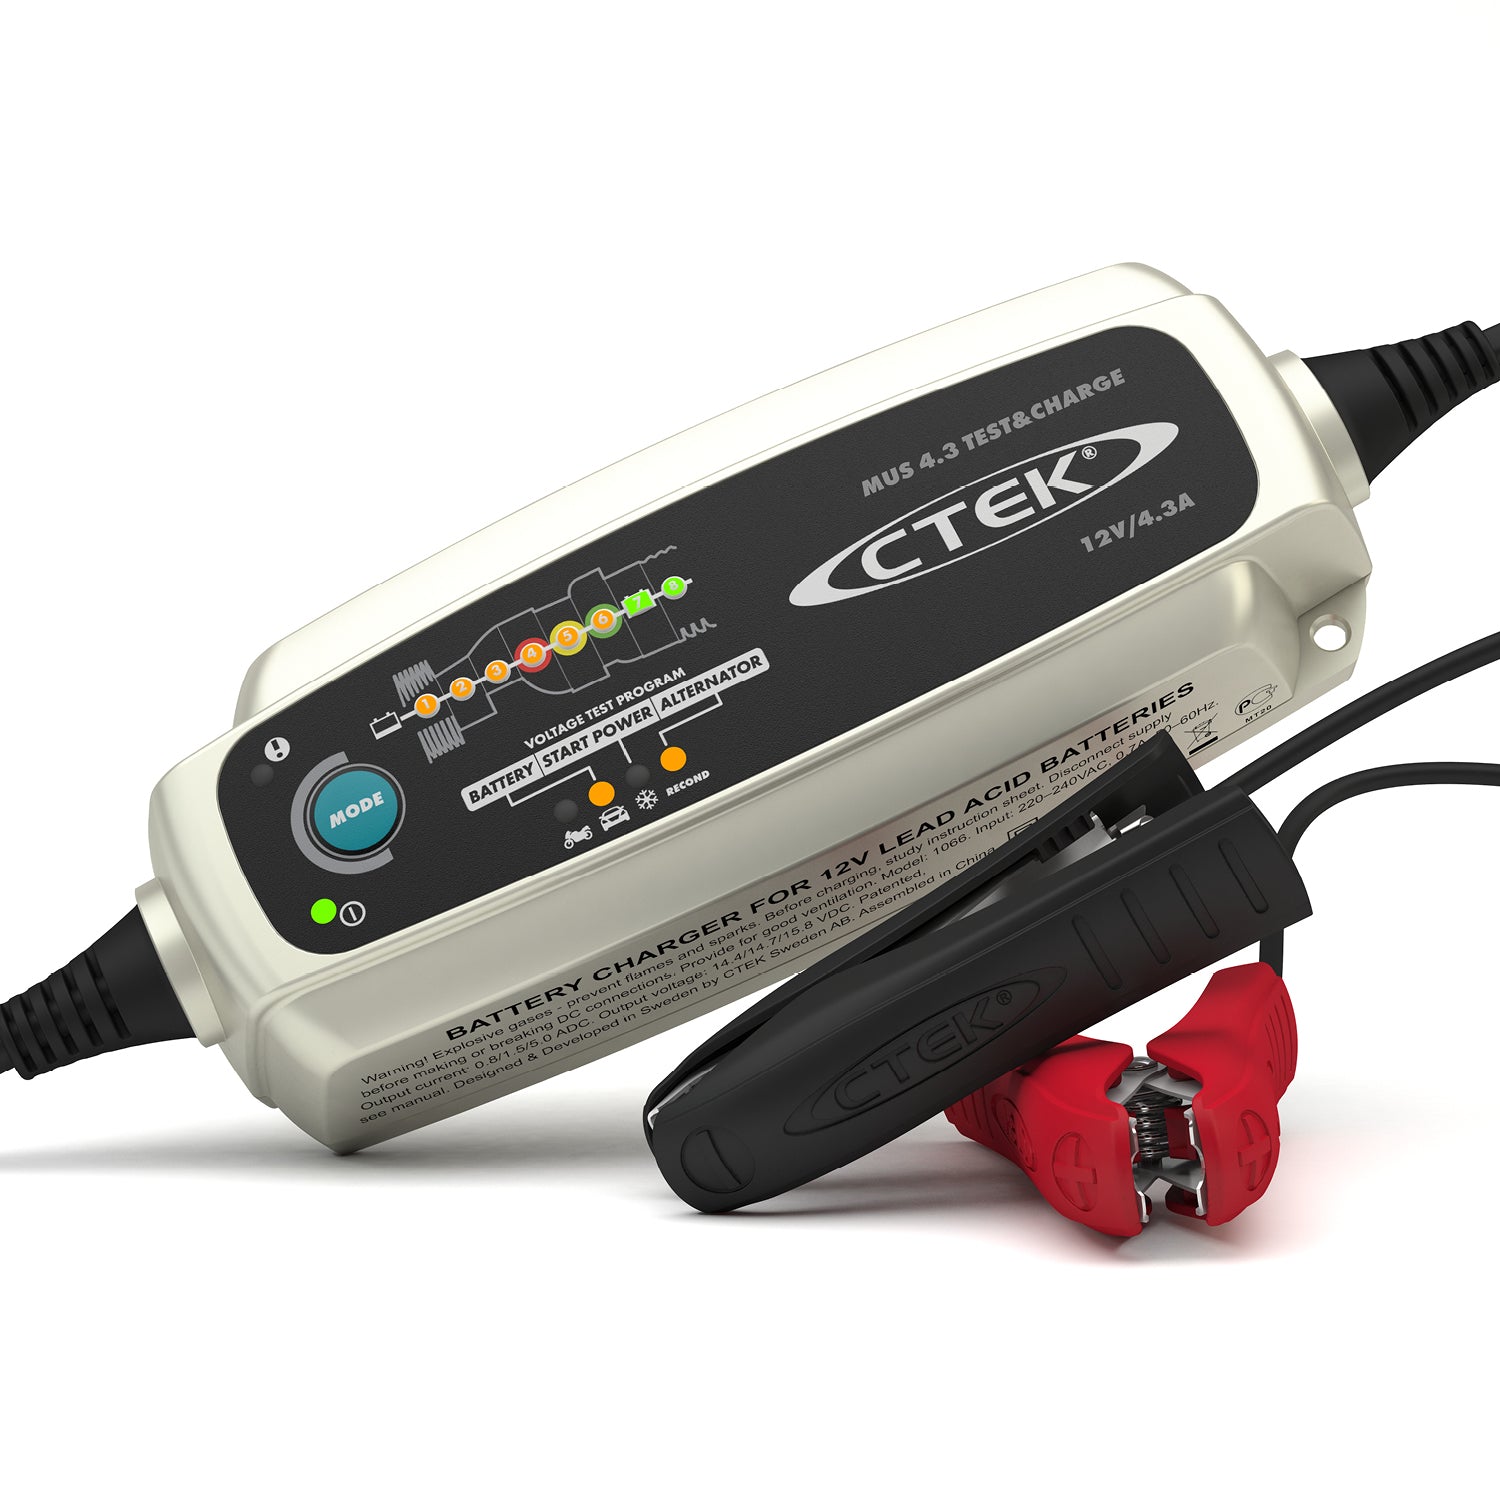 CTEK Charger - MUS 4.3 Test & Charge